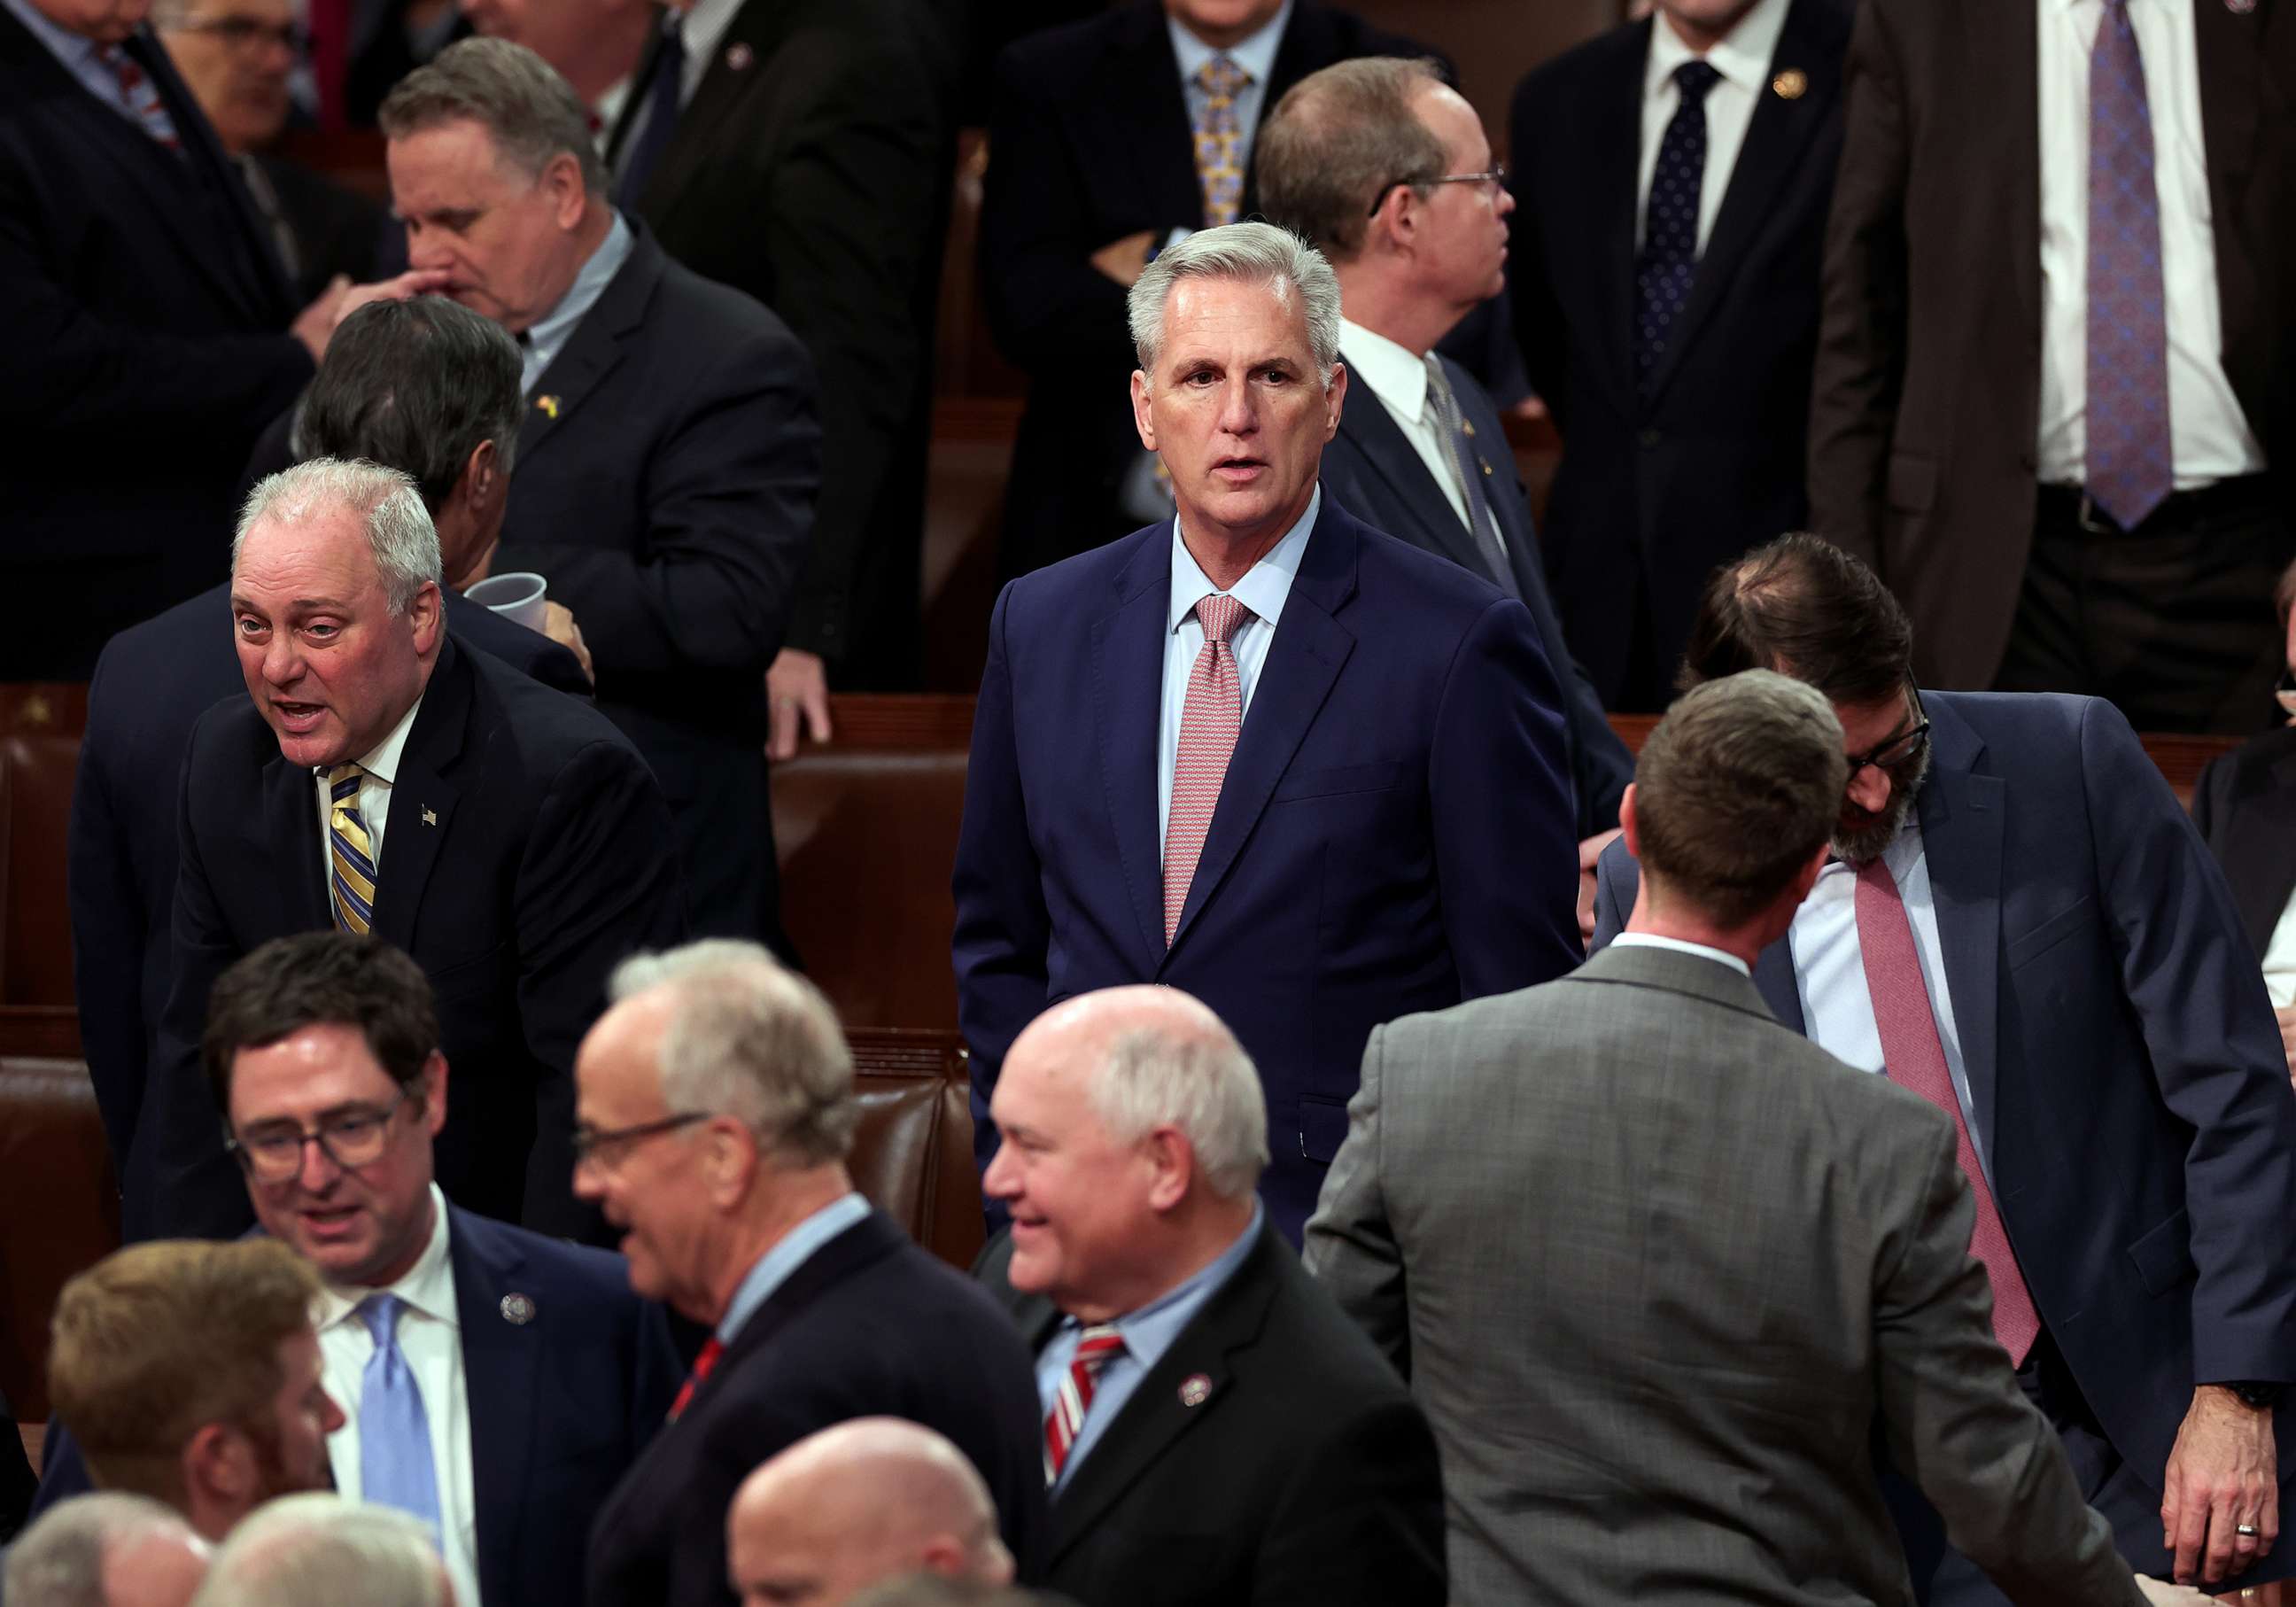 PHOTO: House Minority Leader U.S. Rep. Kevin McCarthy arrives for an address by President of Ukraine Volodymyr Zelensky during a joint meeting of Congress in the House Chamber of the U.S. Capitol on Dec. 21, 2022, in Washington, D.C.